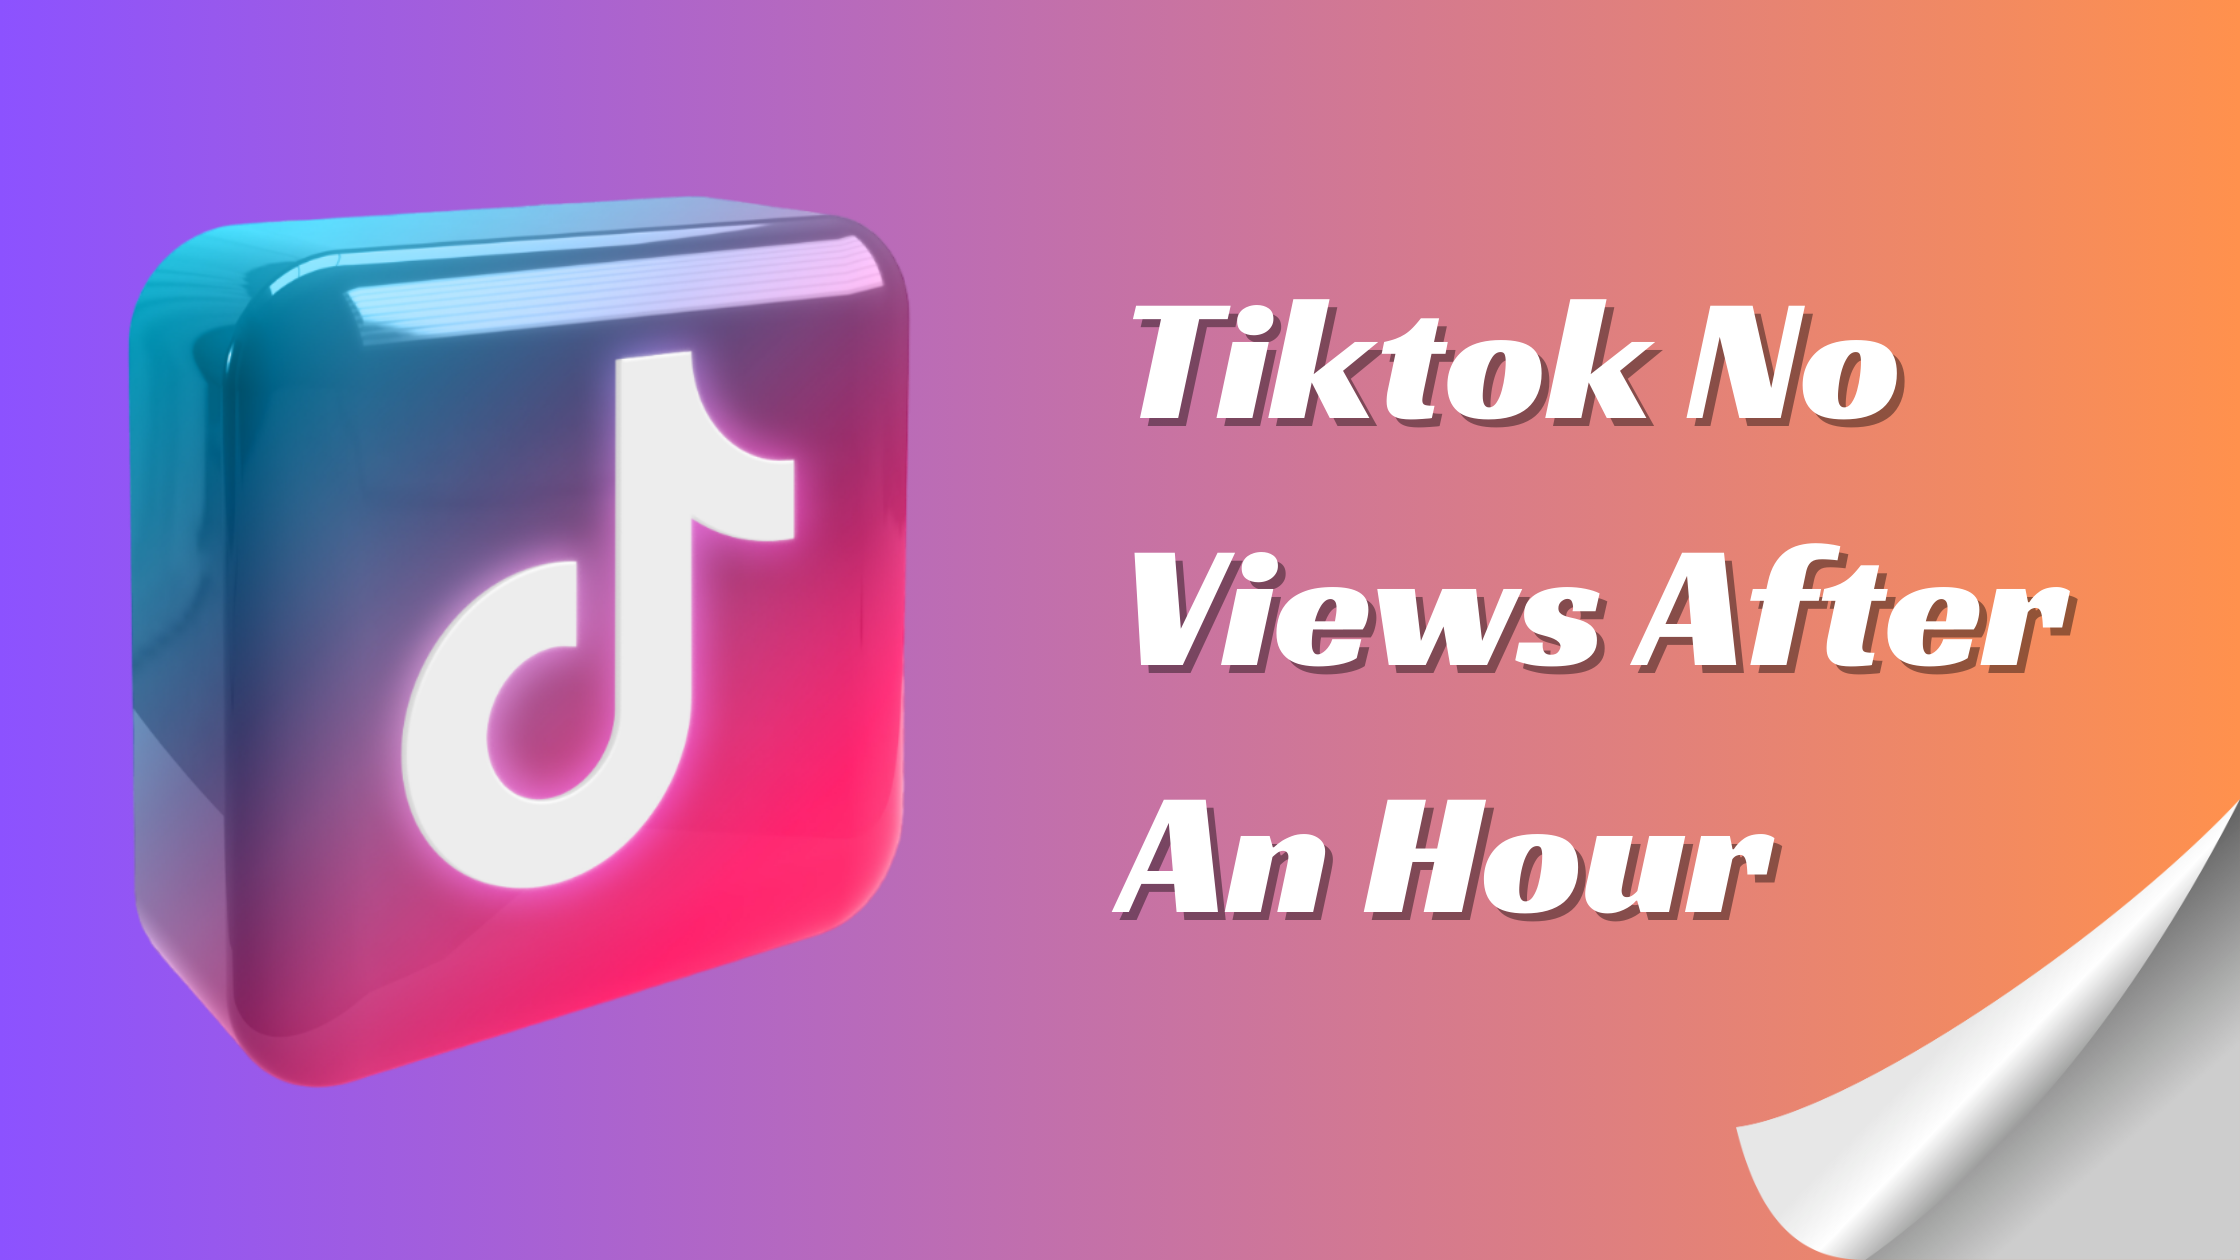 Tiktok No Views After An Hour? Why Does It Happen?